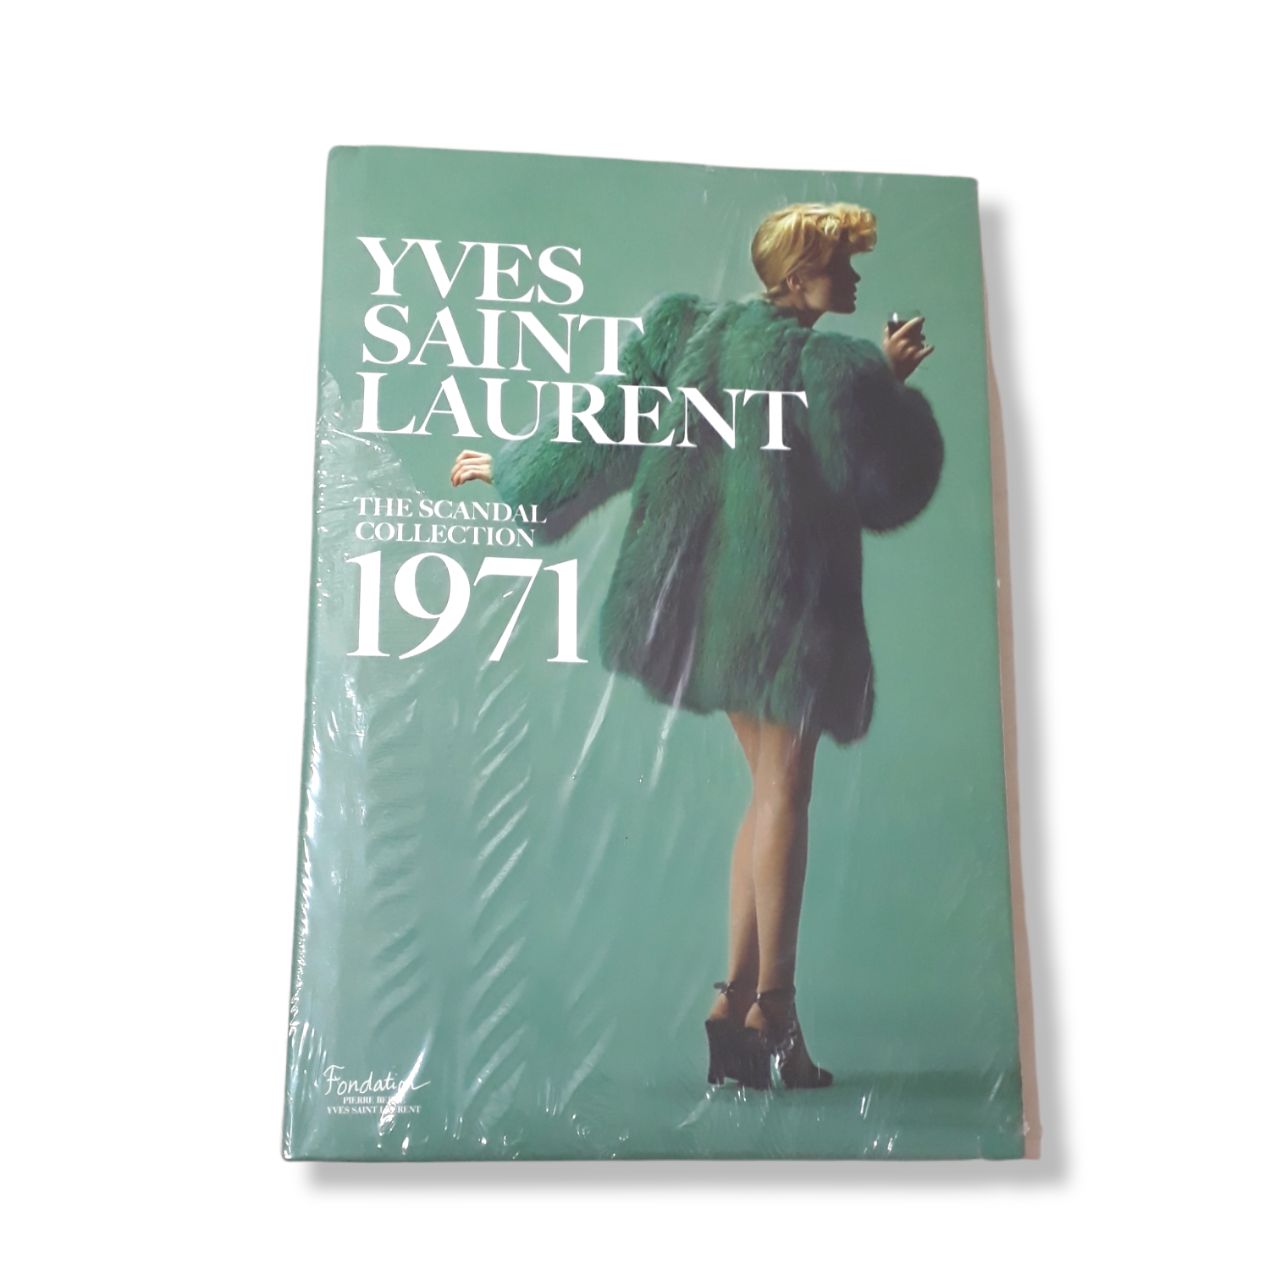 Yves Saint Laurent: The Scandal Collection, 1971 (Hardcover)